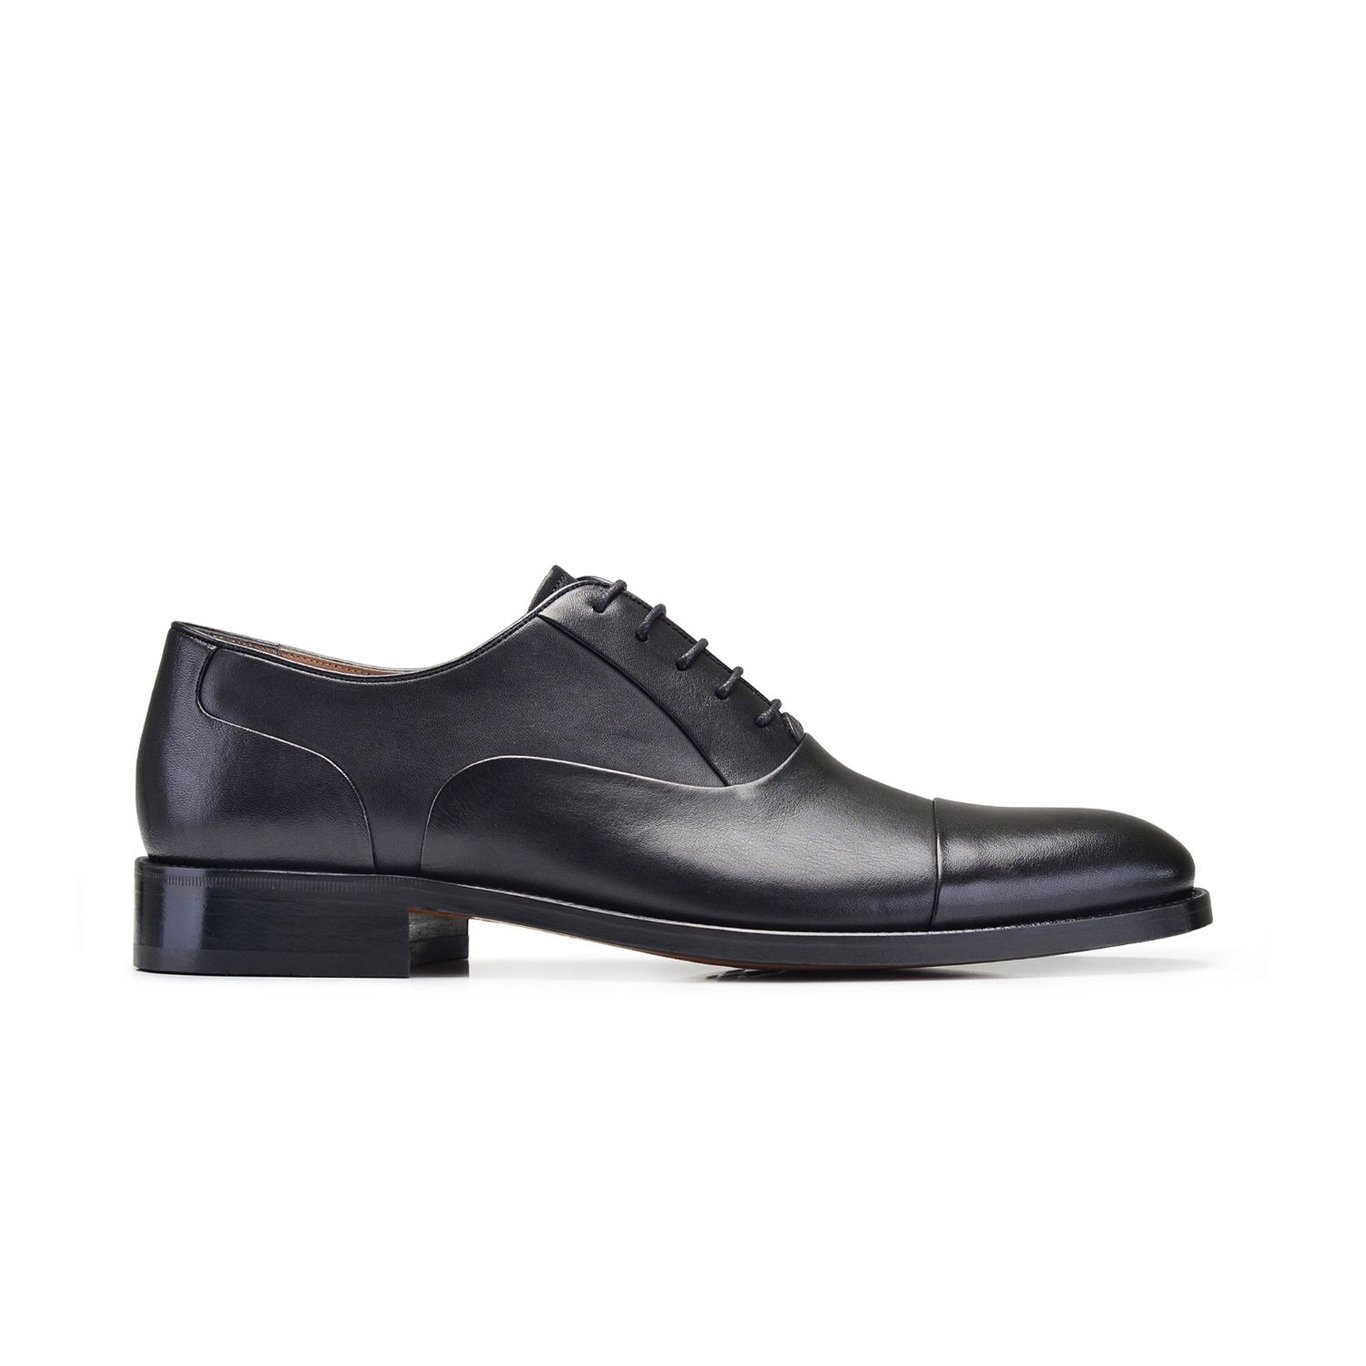 Nevzat Onay Genuine Leather Black Men Classical Shoes -9116-